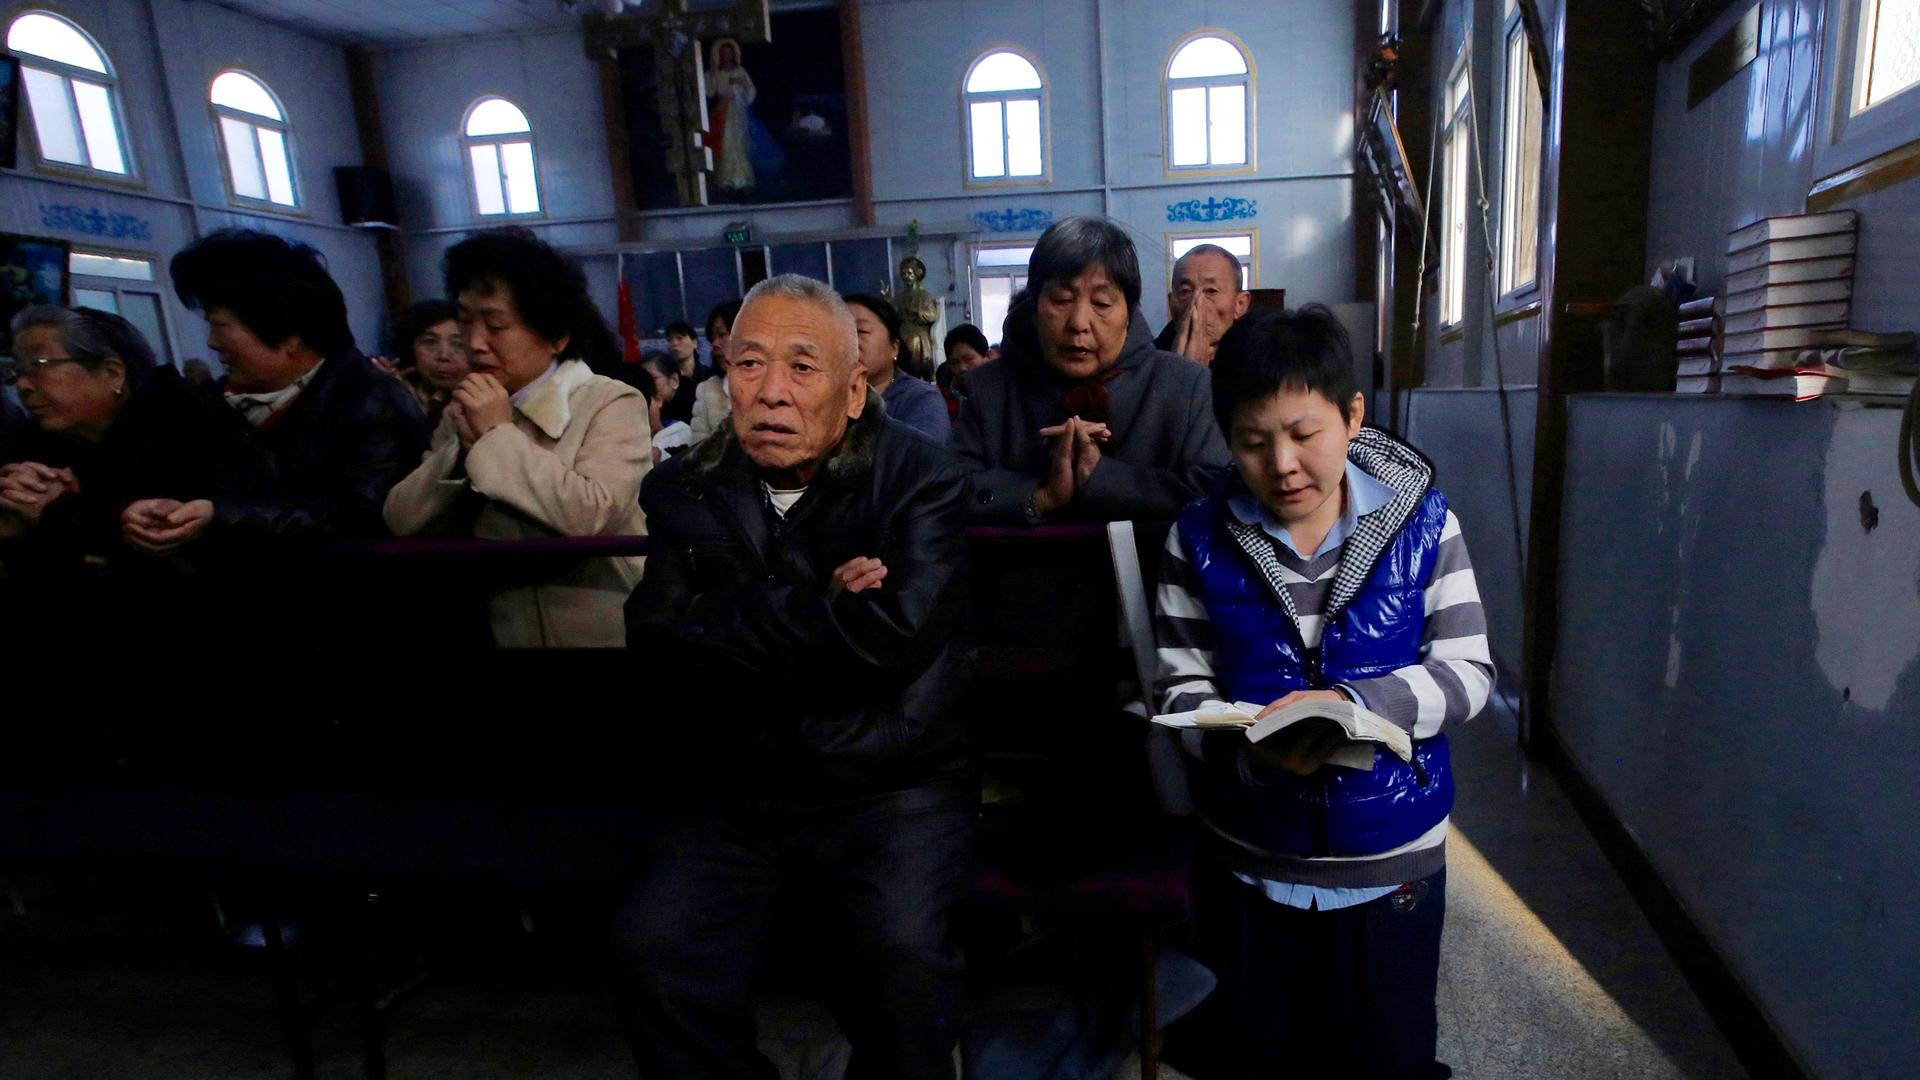 Believers take part in a weekend service at an underground Catholic church in the Chinese city of Tianjin on November 10, 2013.